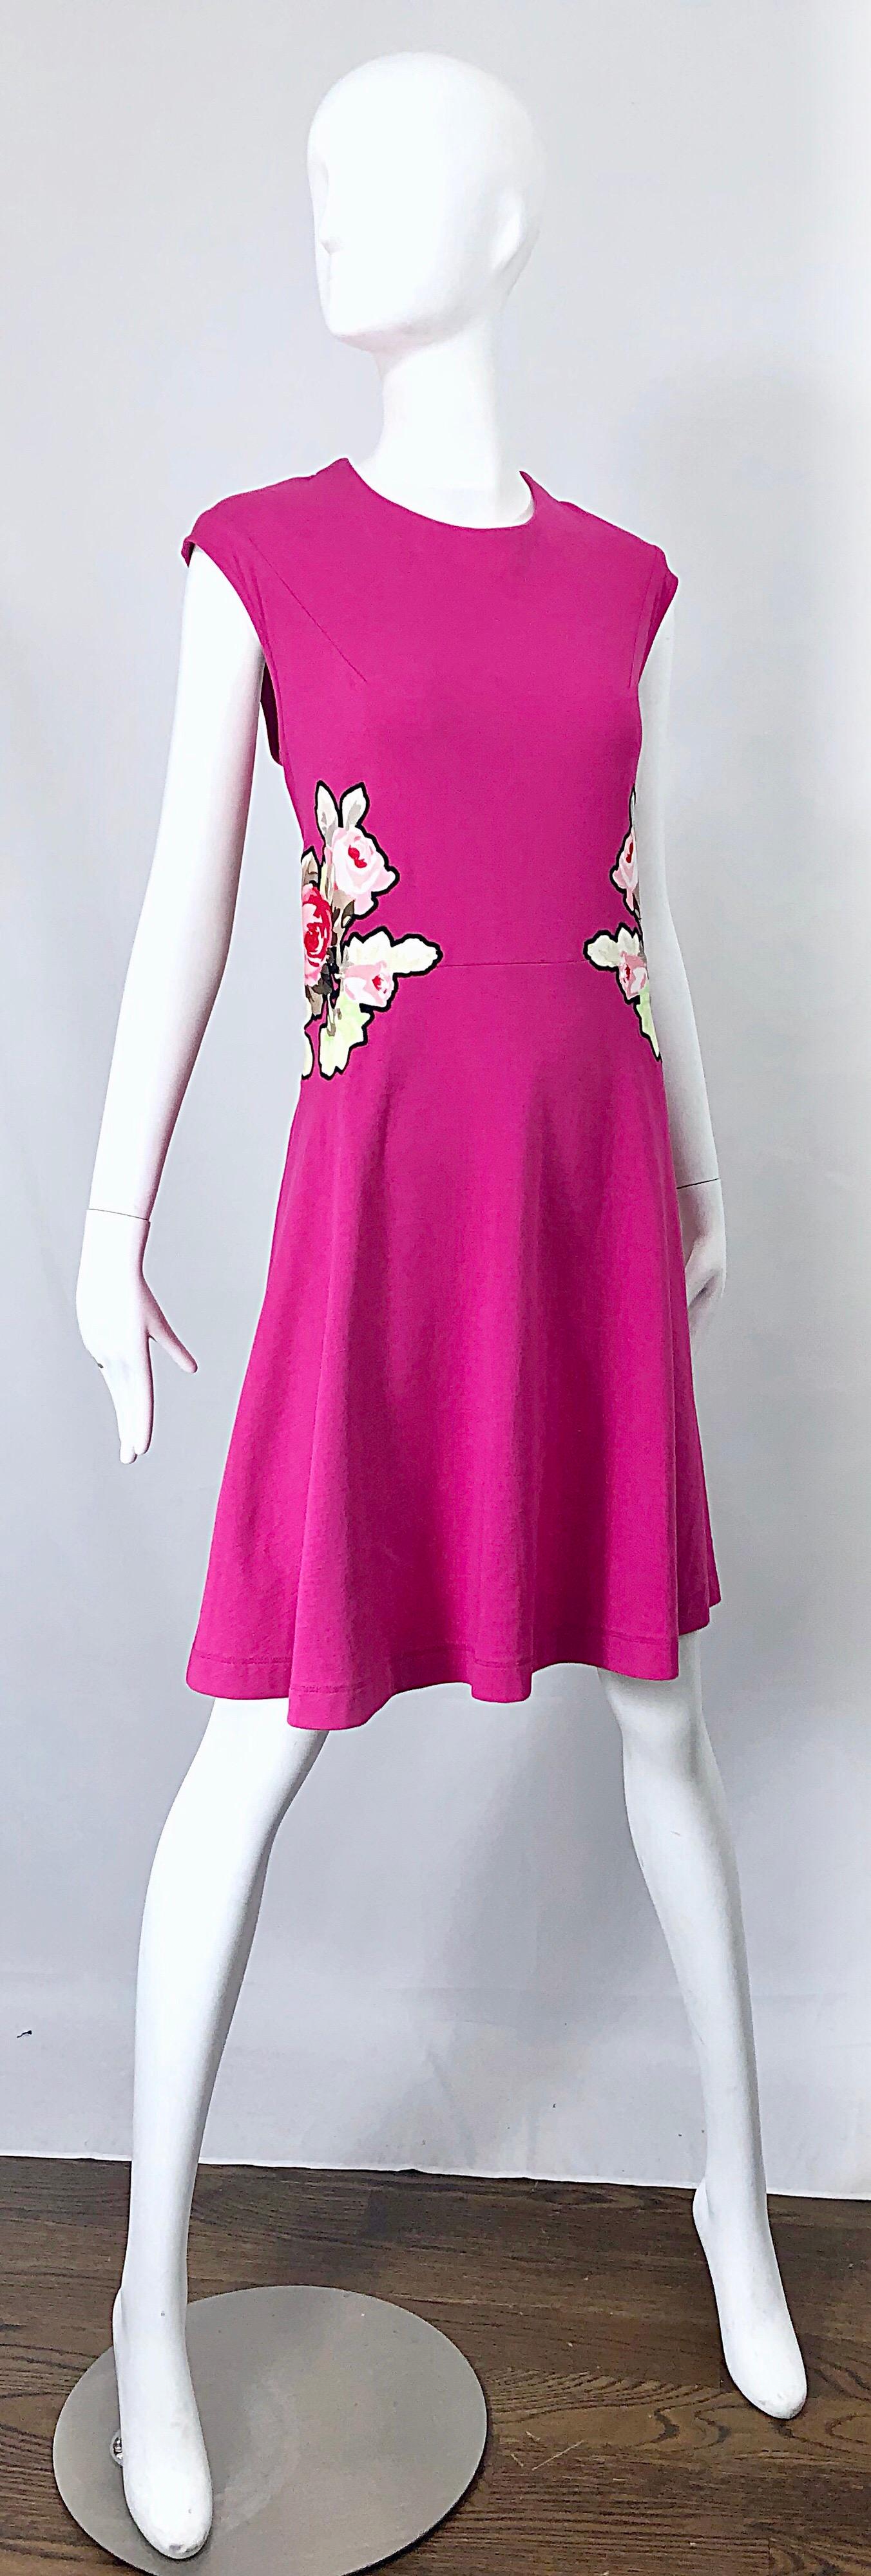 Carven Hot Pink Bouquet of Roses Sleeveless Cotton A - Line Dress Size Medium For Sale 3